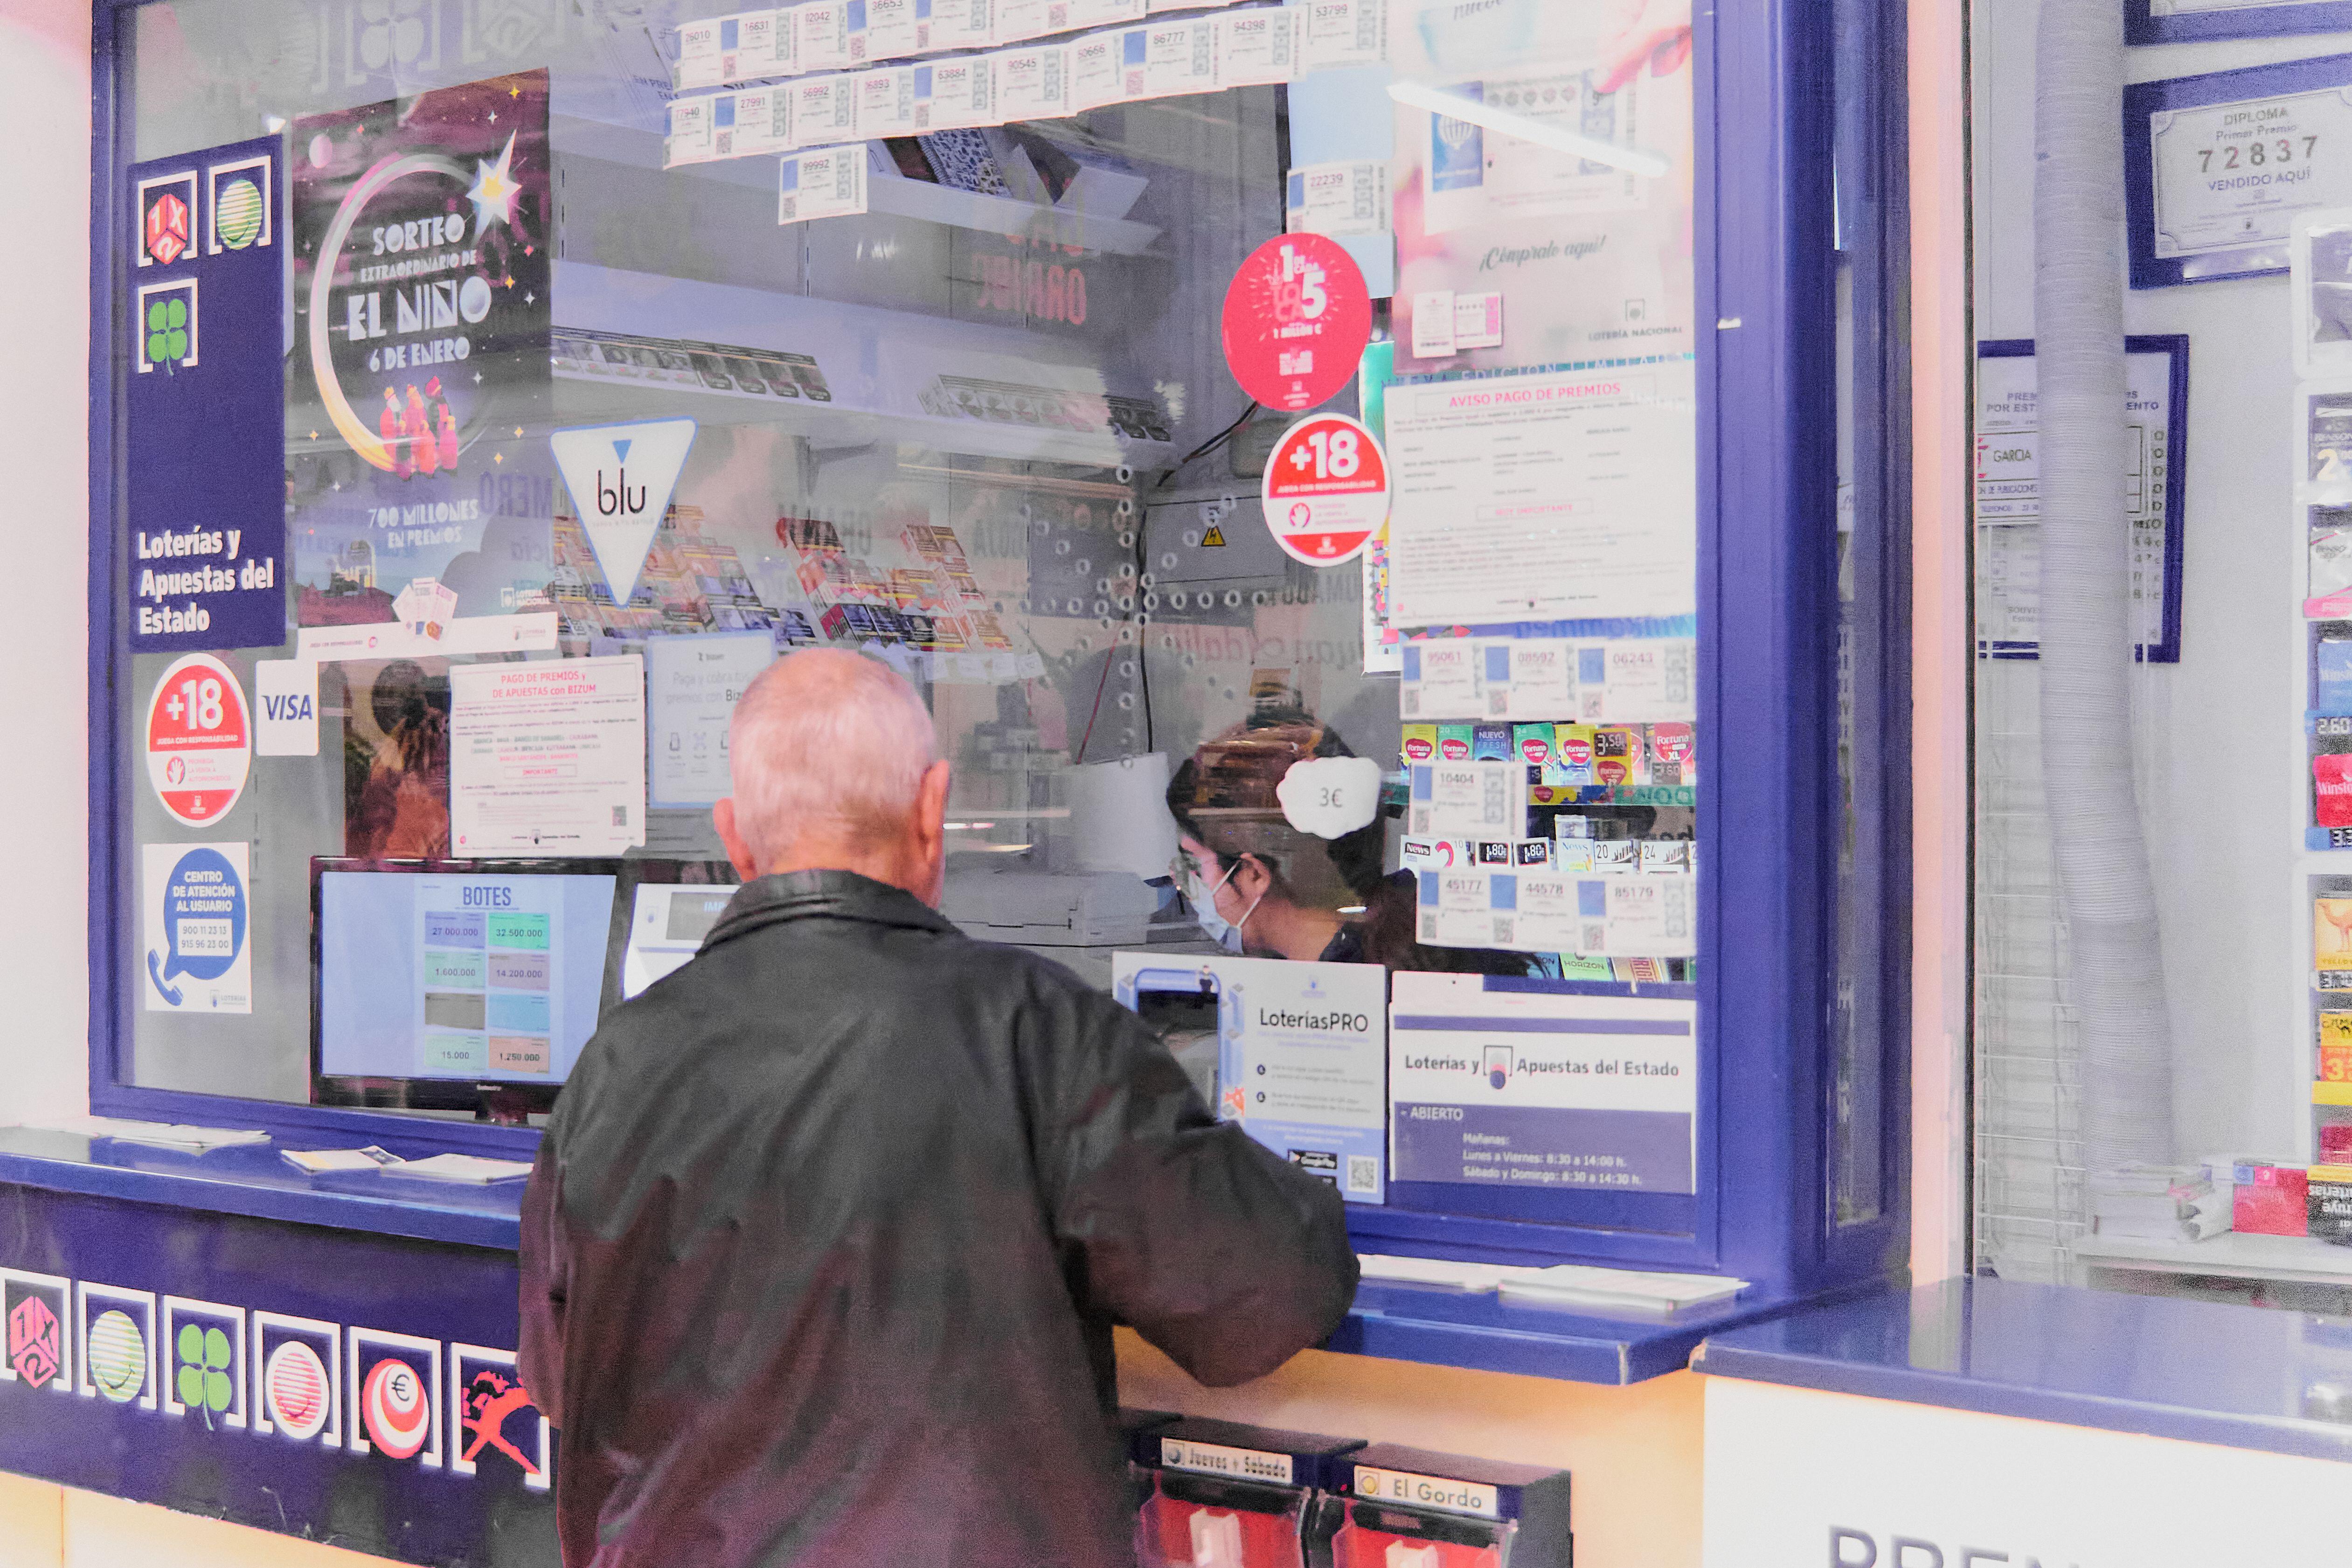 2M75HT1 Tenerife, Spain - January 07, 2023: Unrecognizable elderly person in front of a lottery stand buying lottery tickets attended by a woman